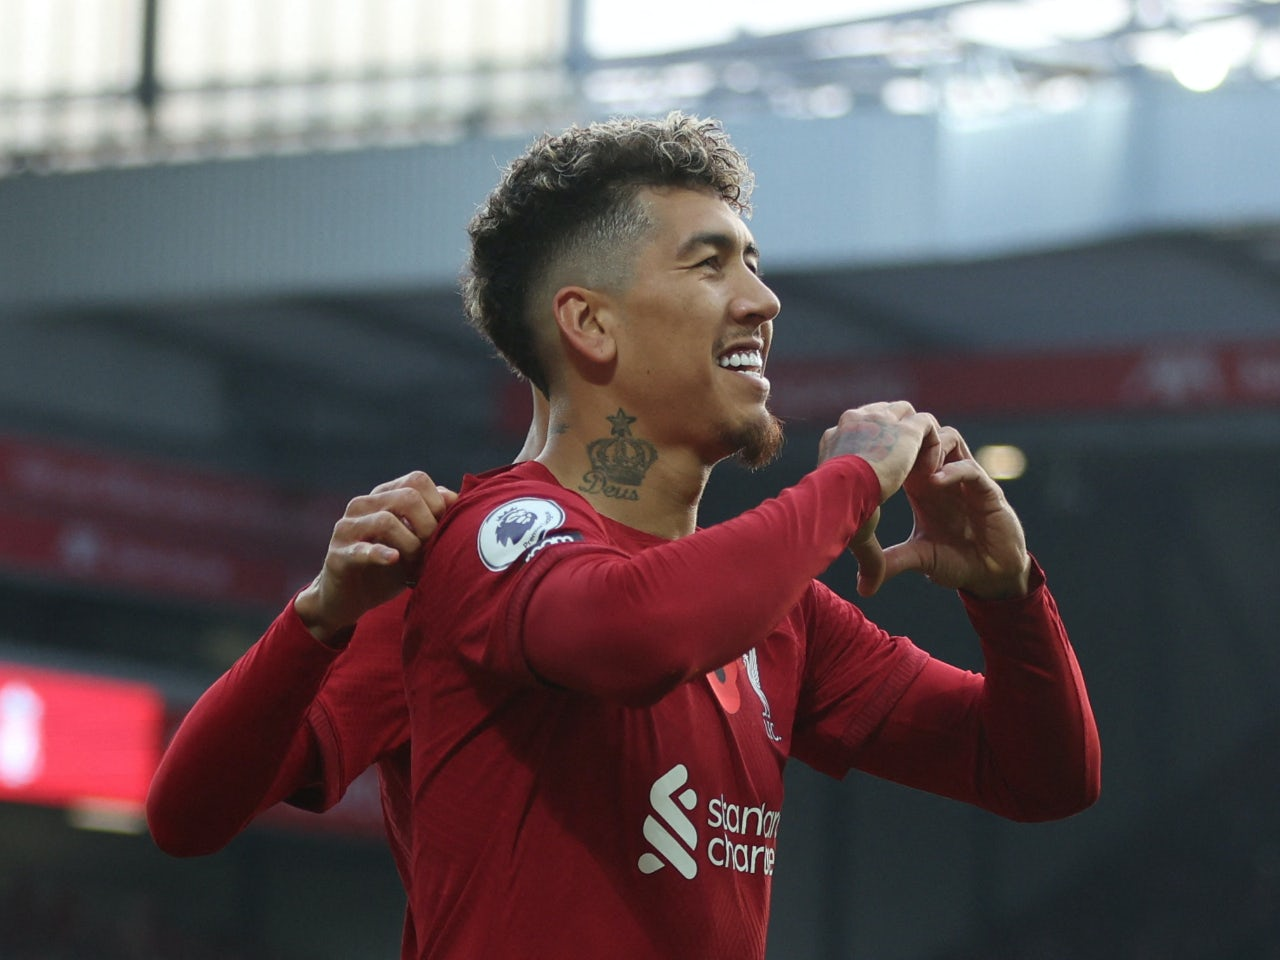 "We're having really good talks with Liverpool" - Roberto Firmino's agent said earlier this month.